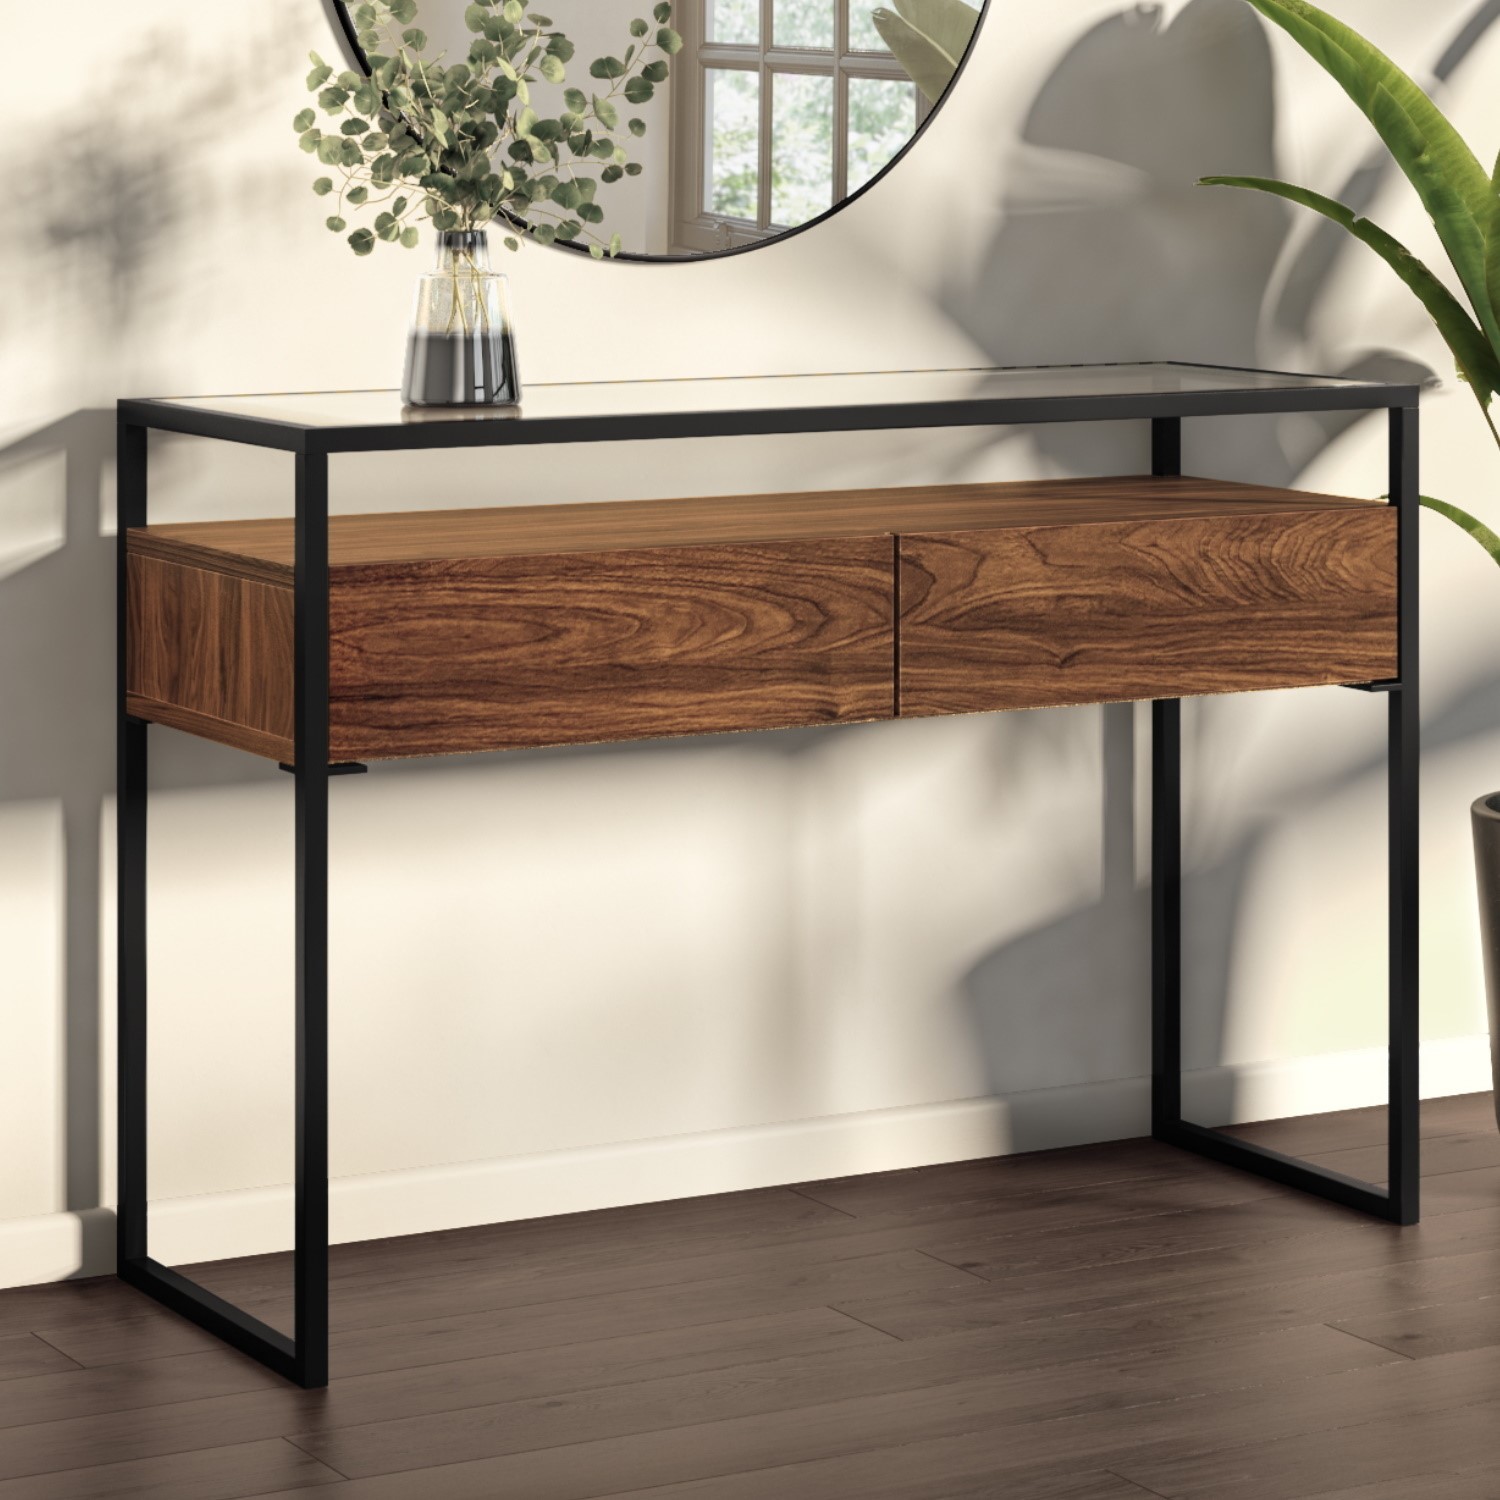 Photo of Large walnut glass top console table with drawers & black legs - akila